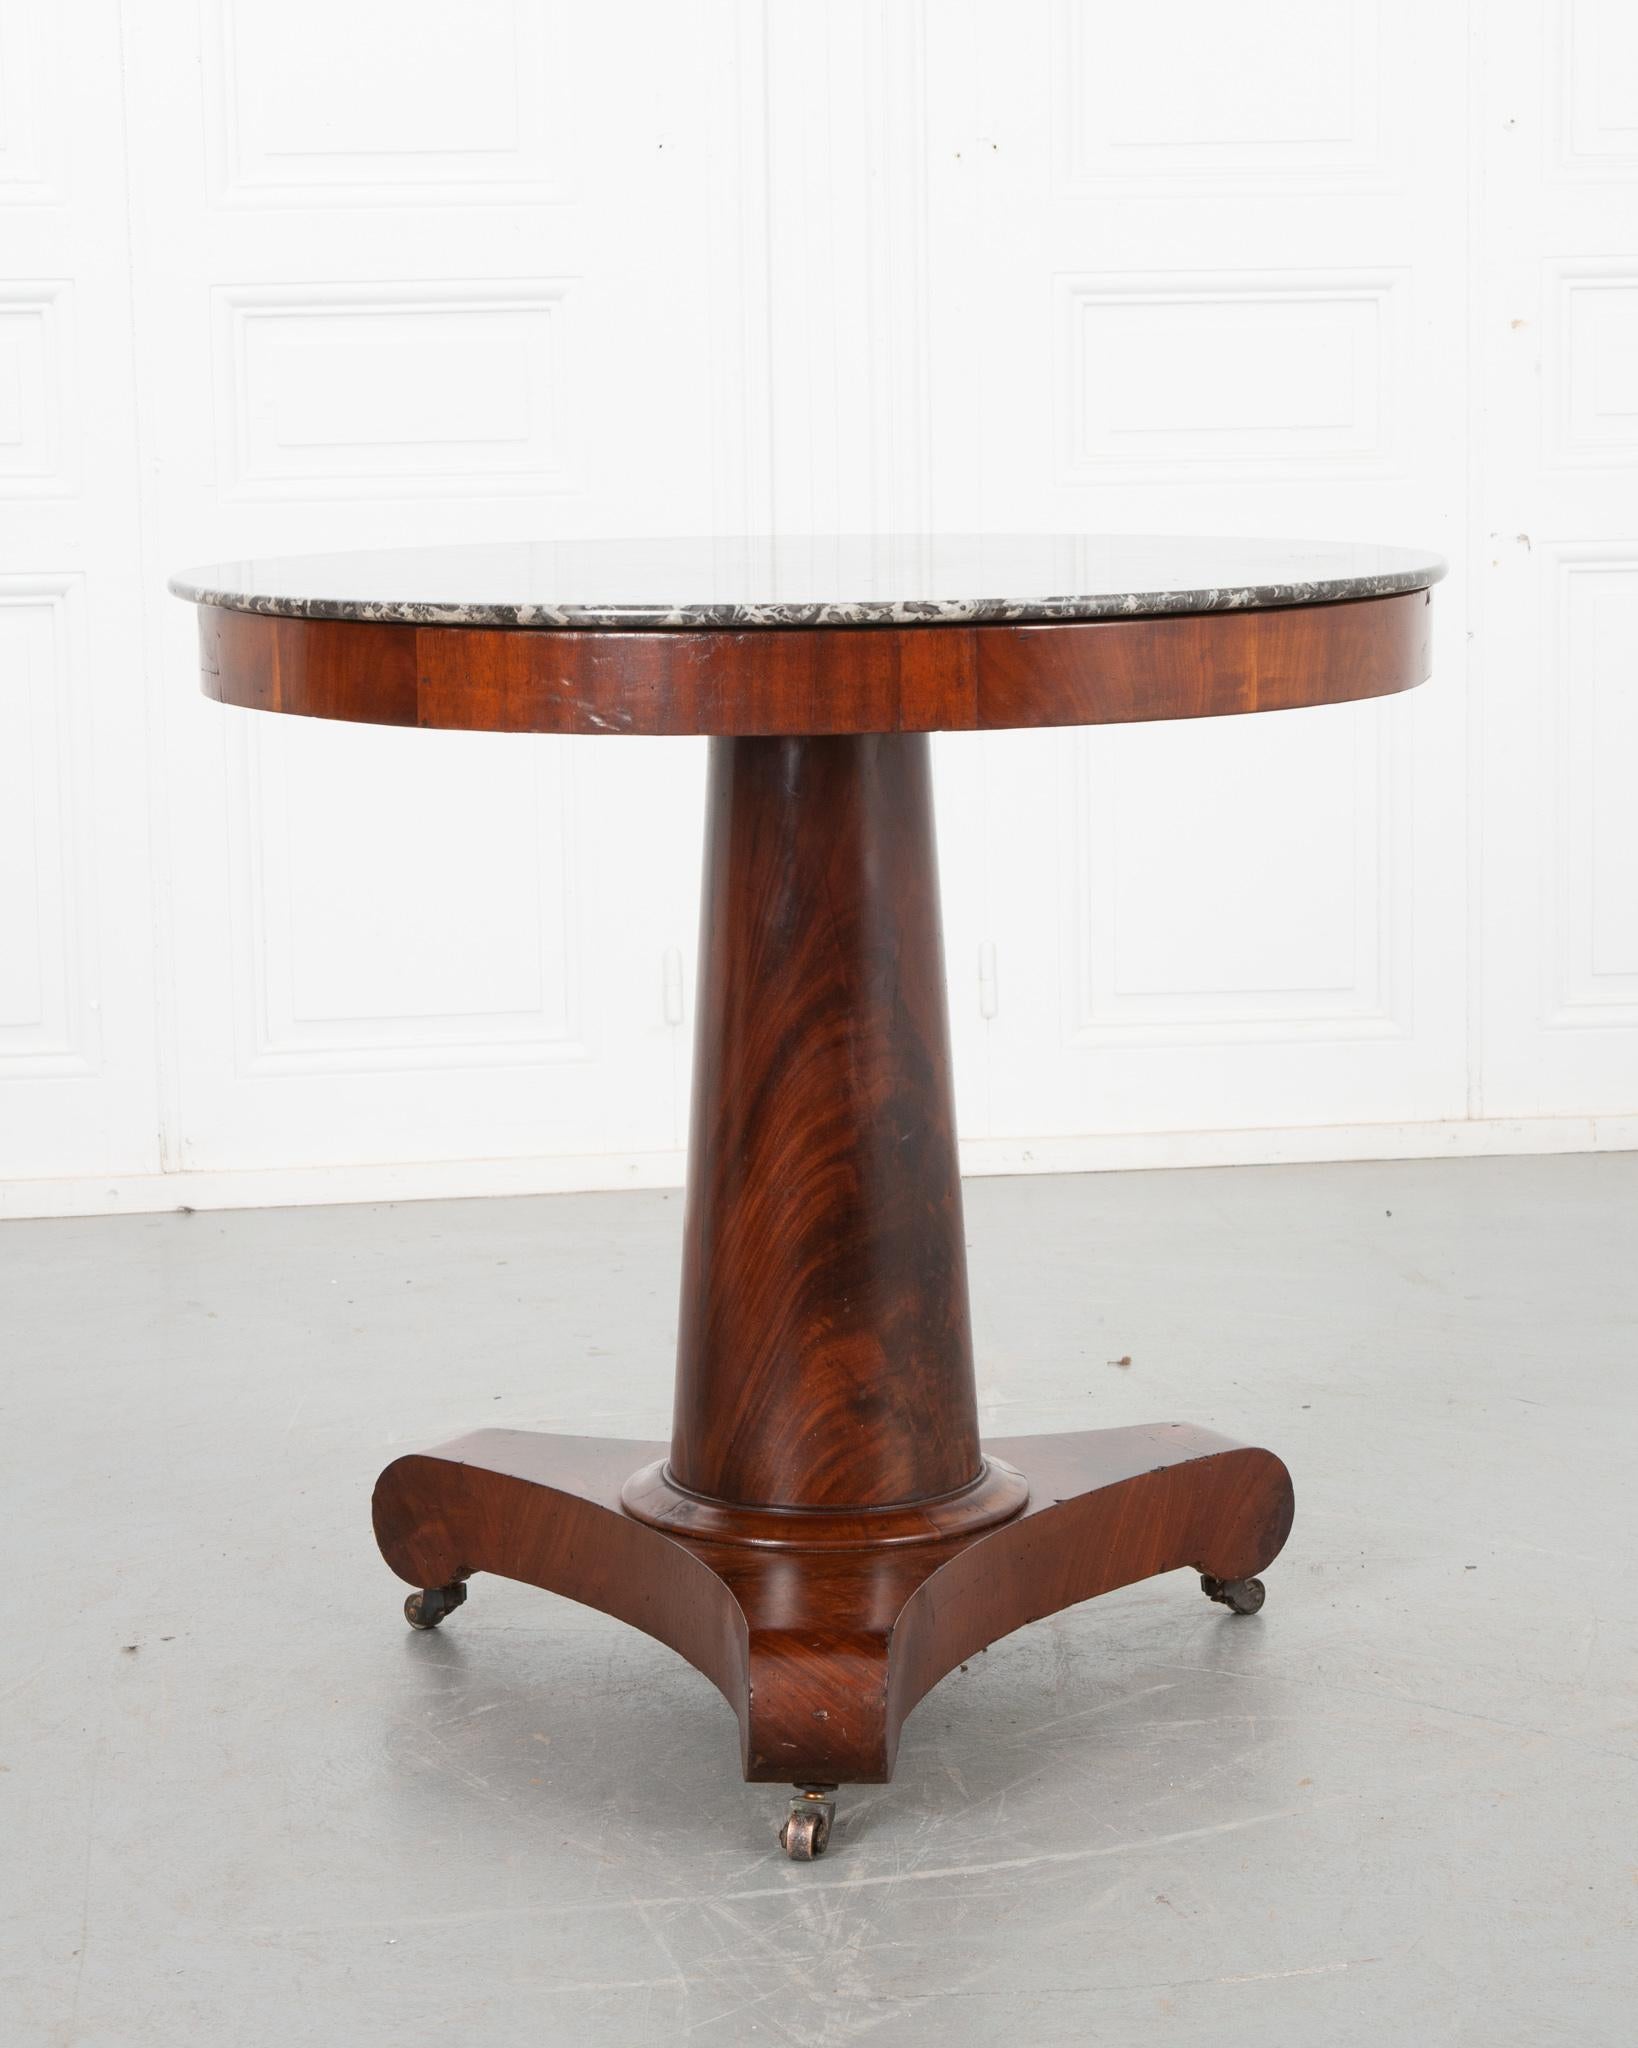 Stone French 19th Century Empire Style Center Table